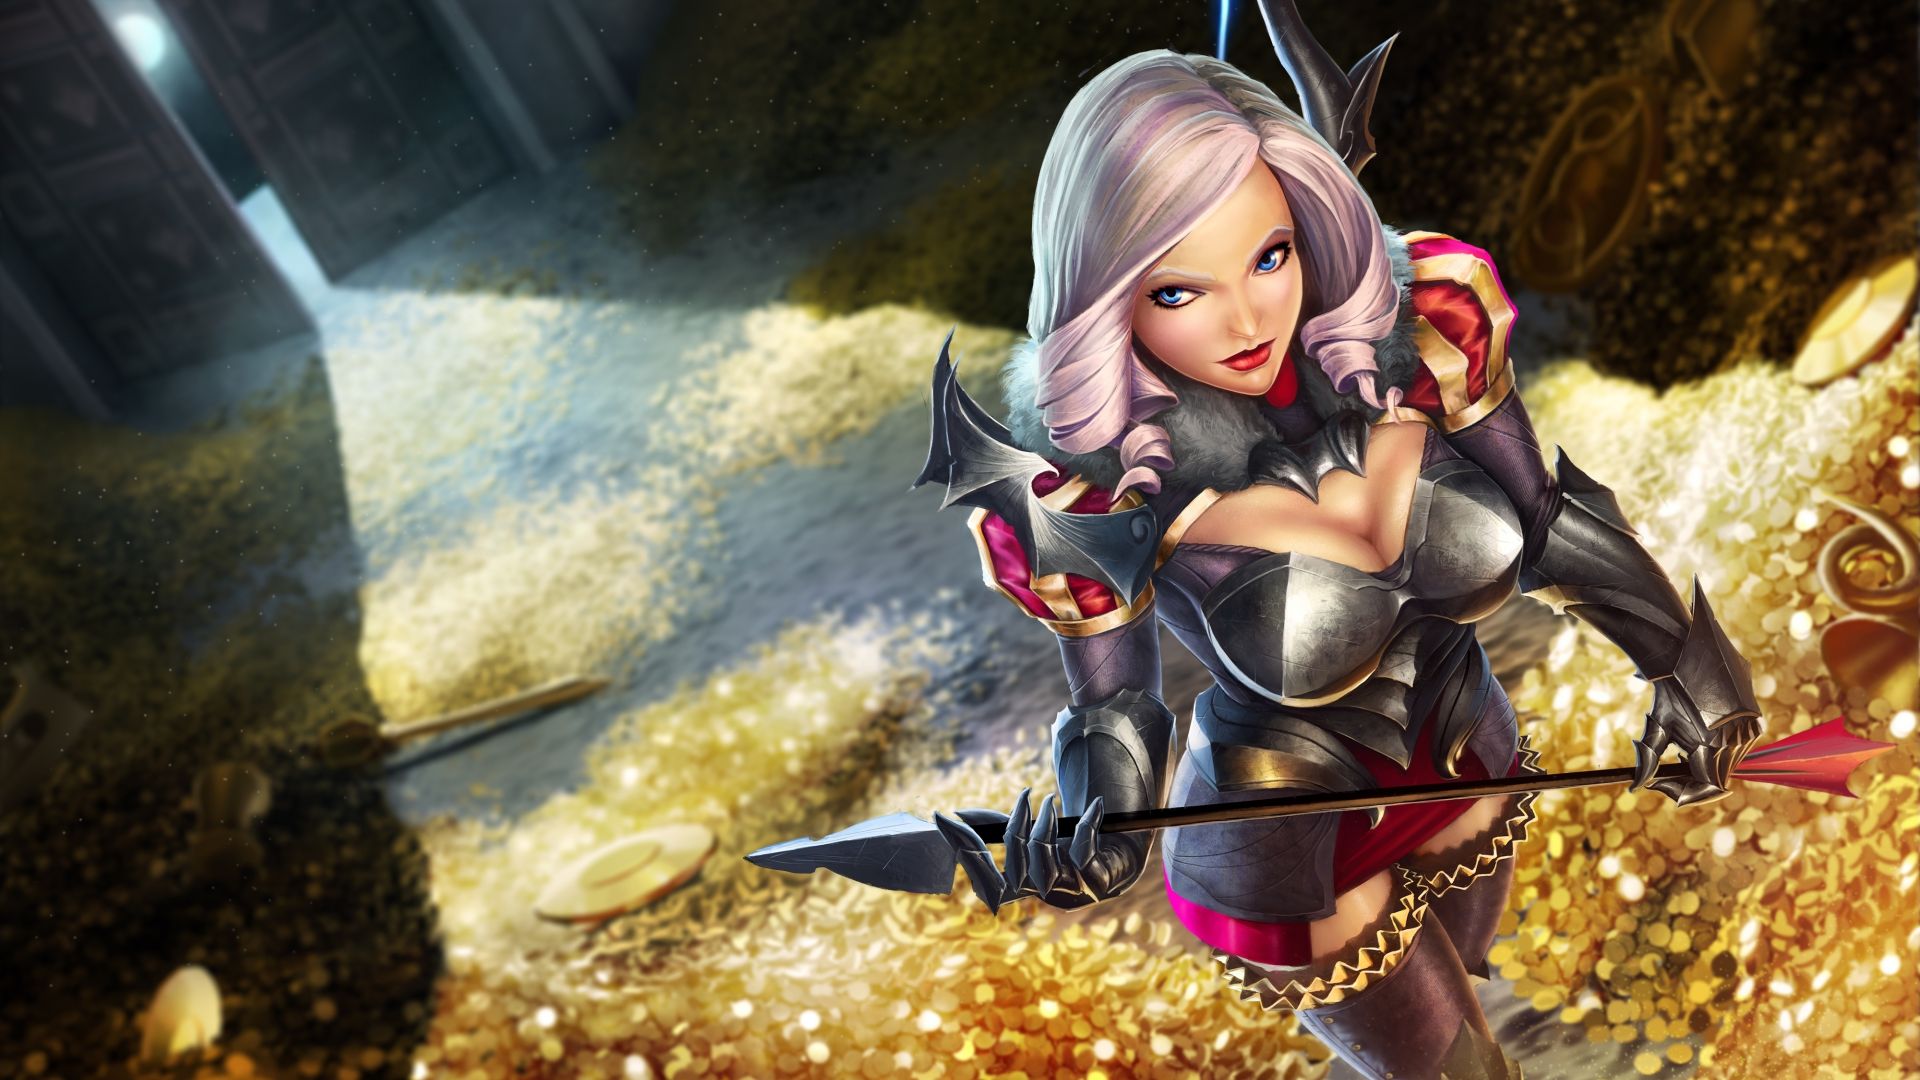 Wallpaper Ashe league of legends game